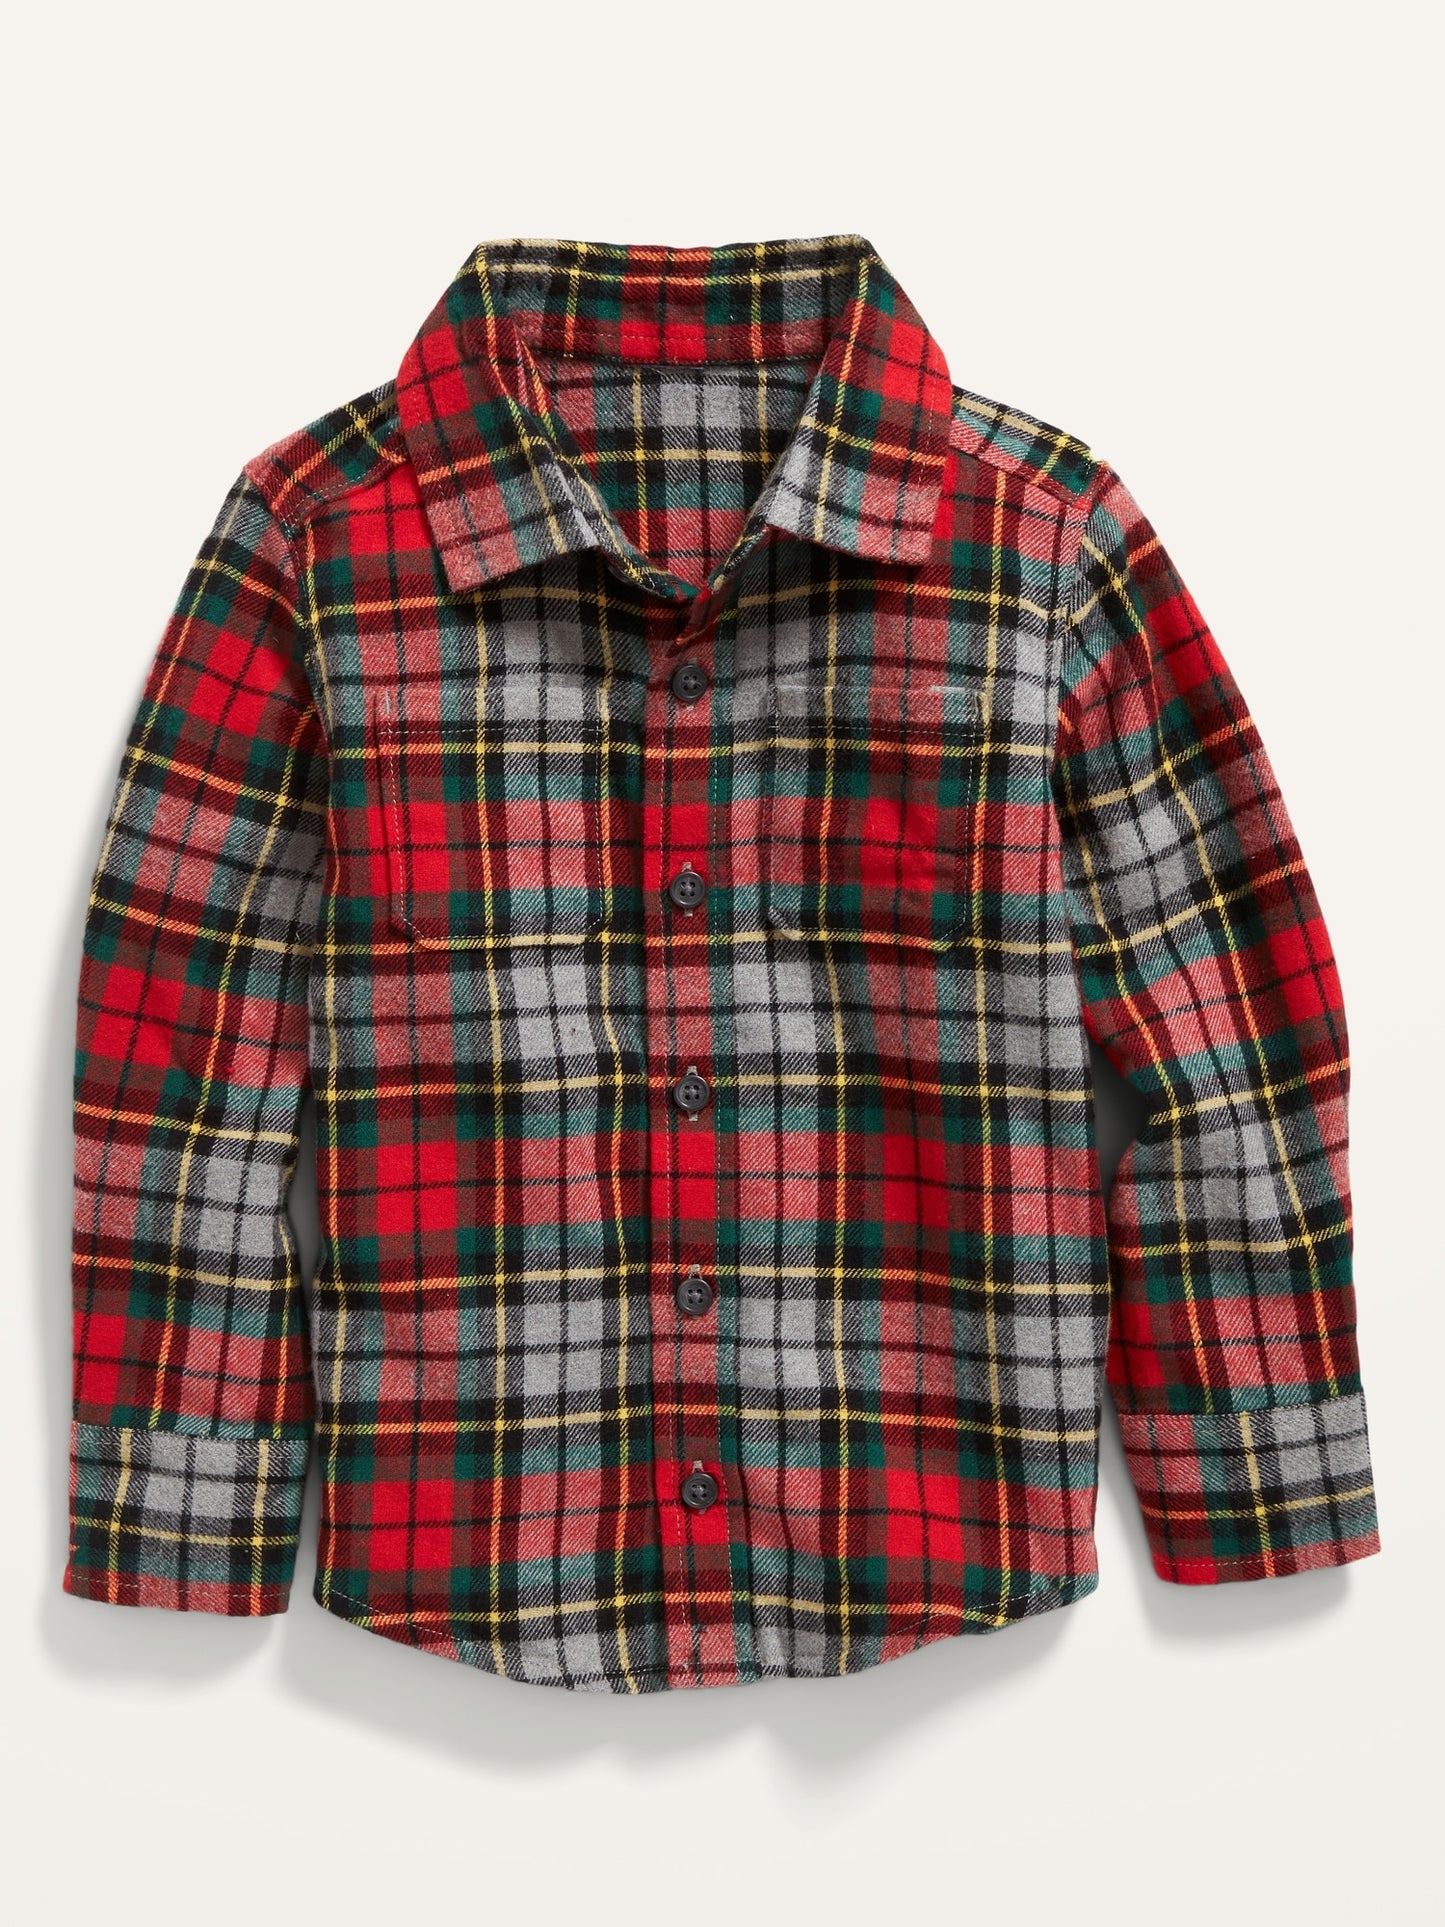 ON Unisex Plaid Flannel Long-Sleeve Shirt For Toddler - Gray Plaid